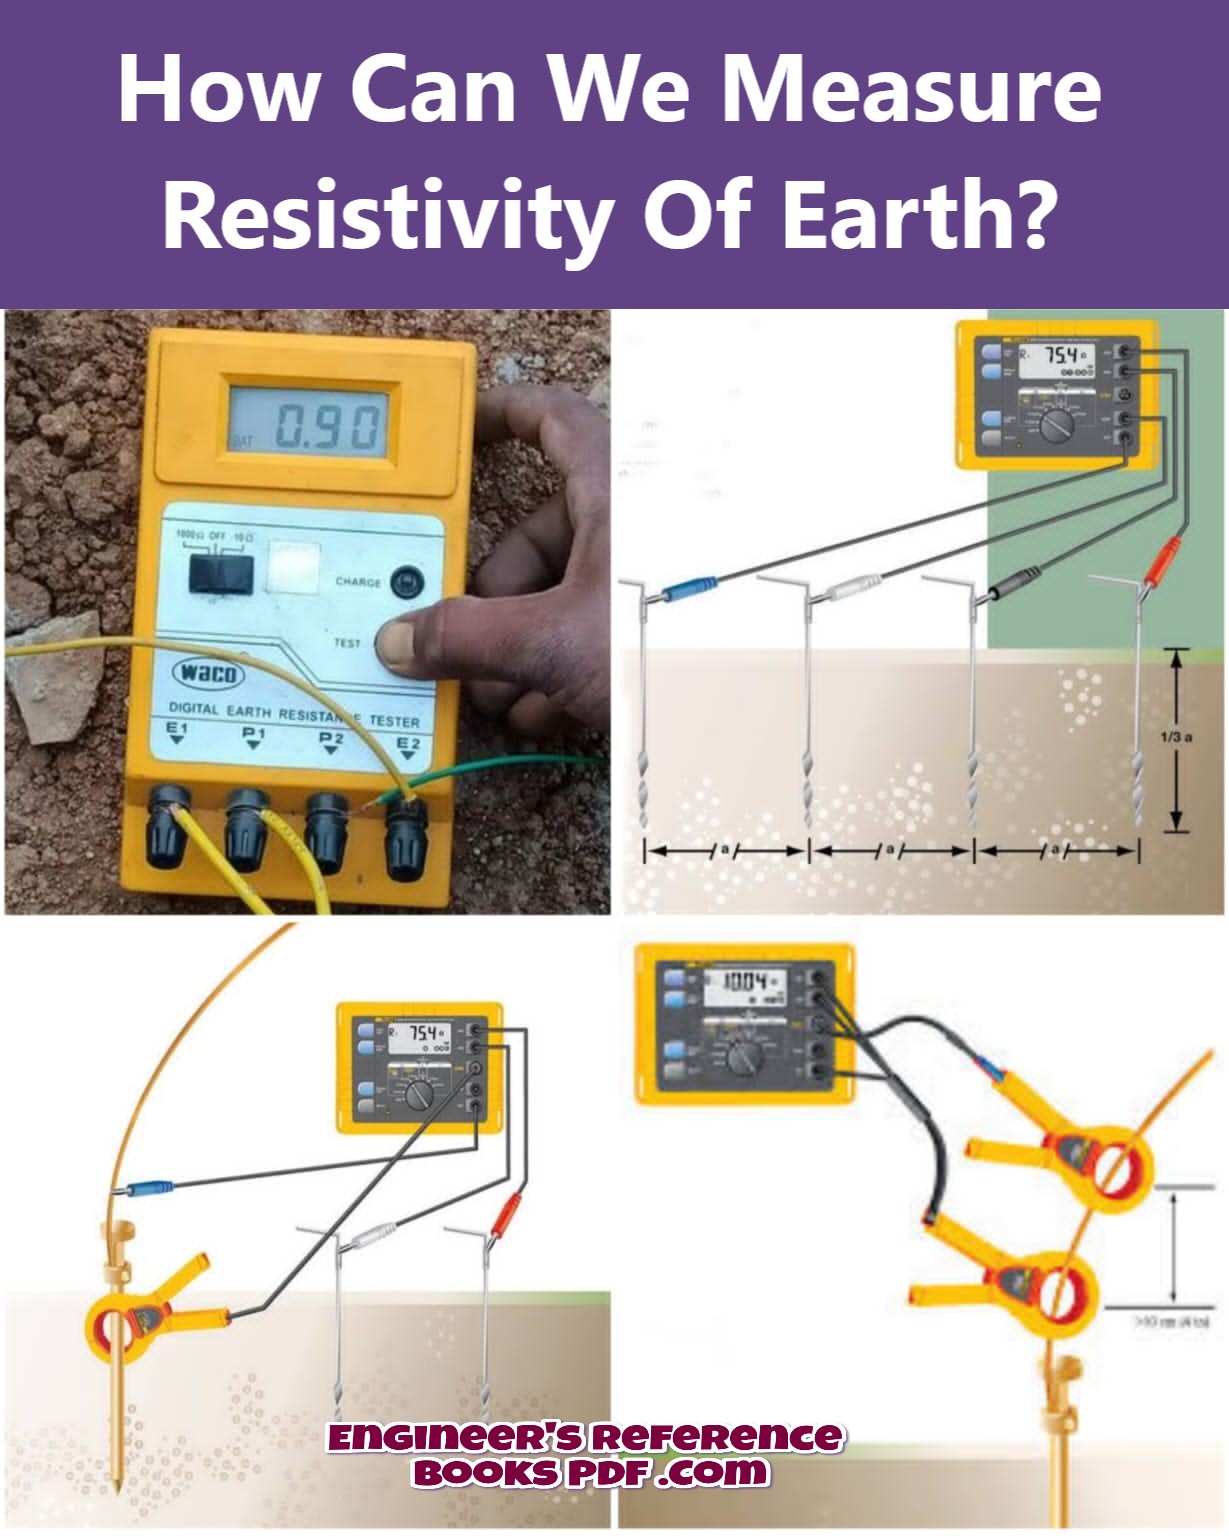 How Can We Measure Resistivity Of Earth?